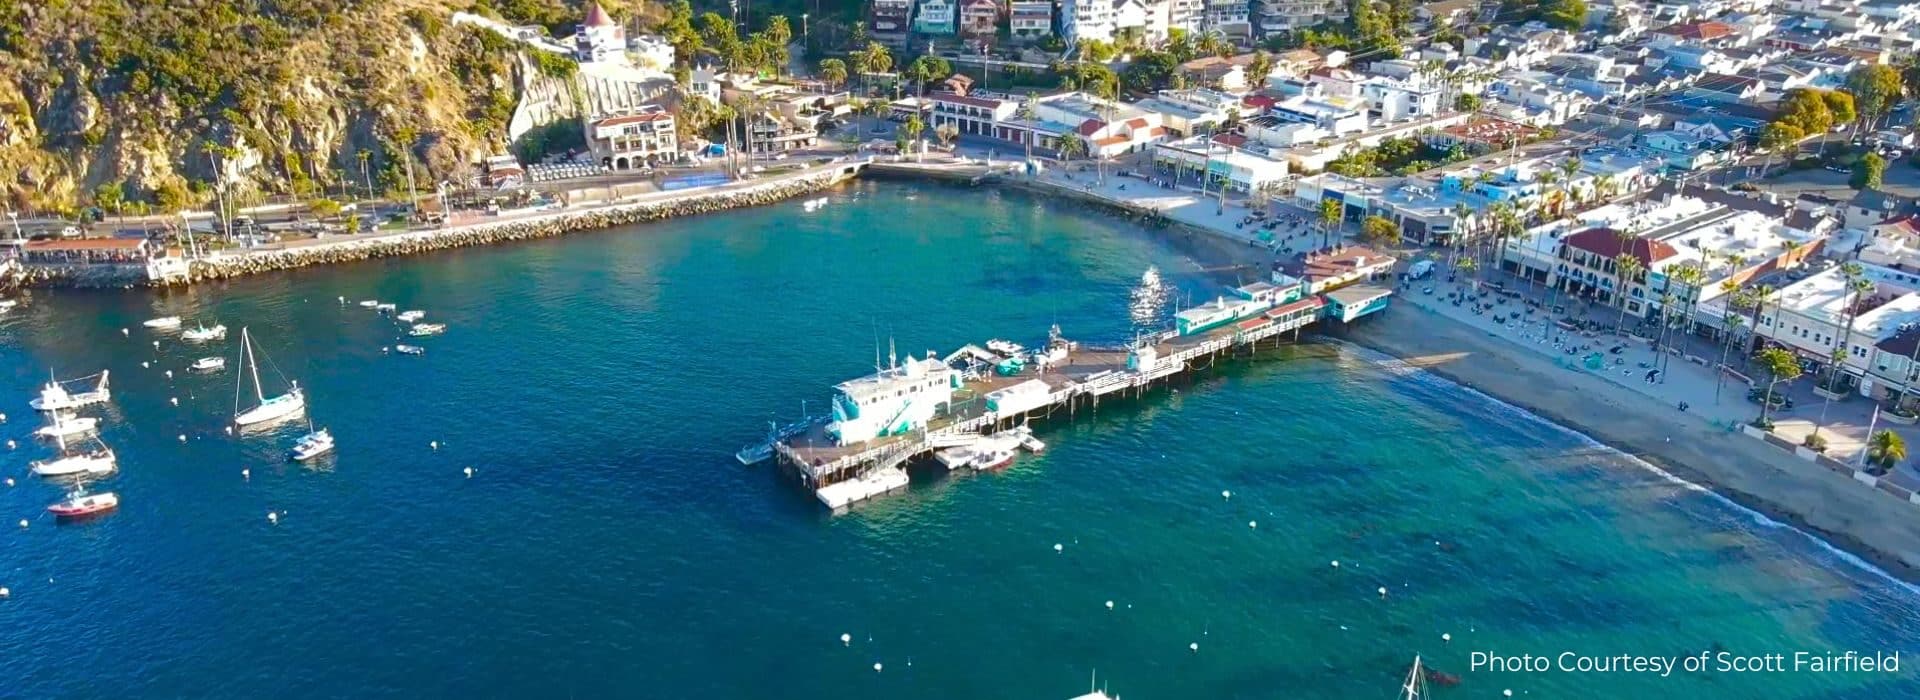 An aerial view of the Green Pier, photo courtesy of Scott Fairfield